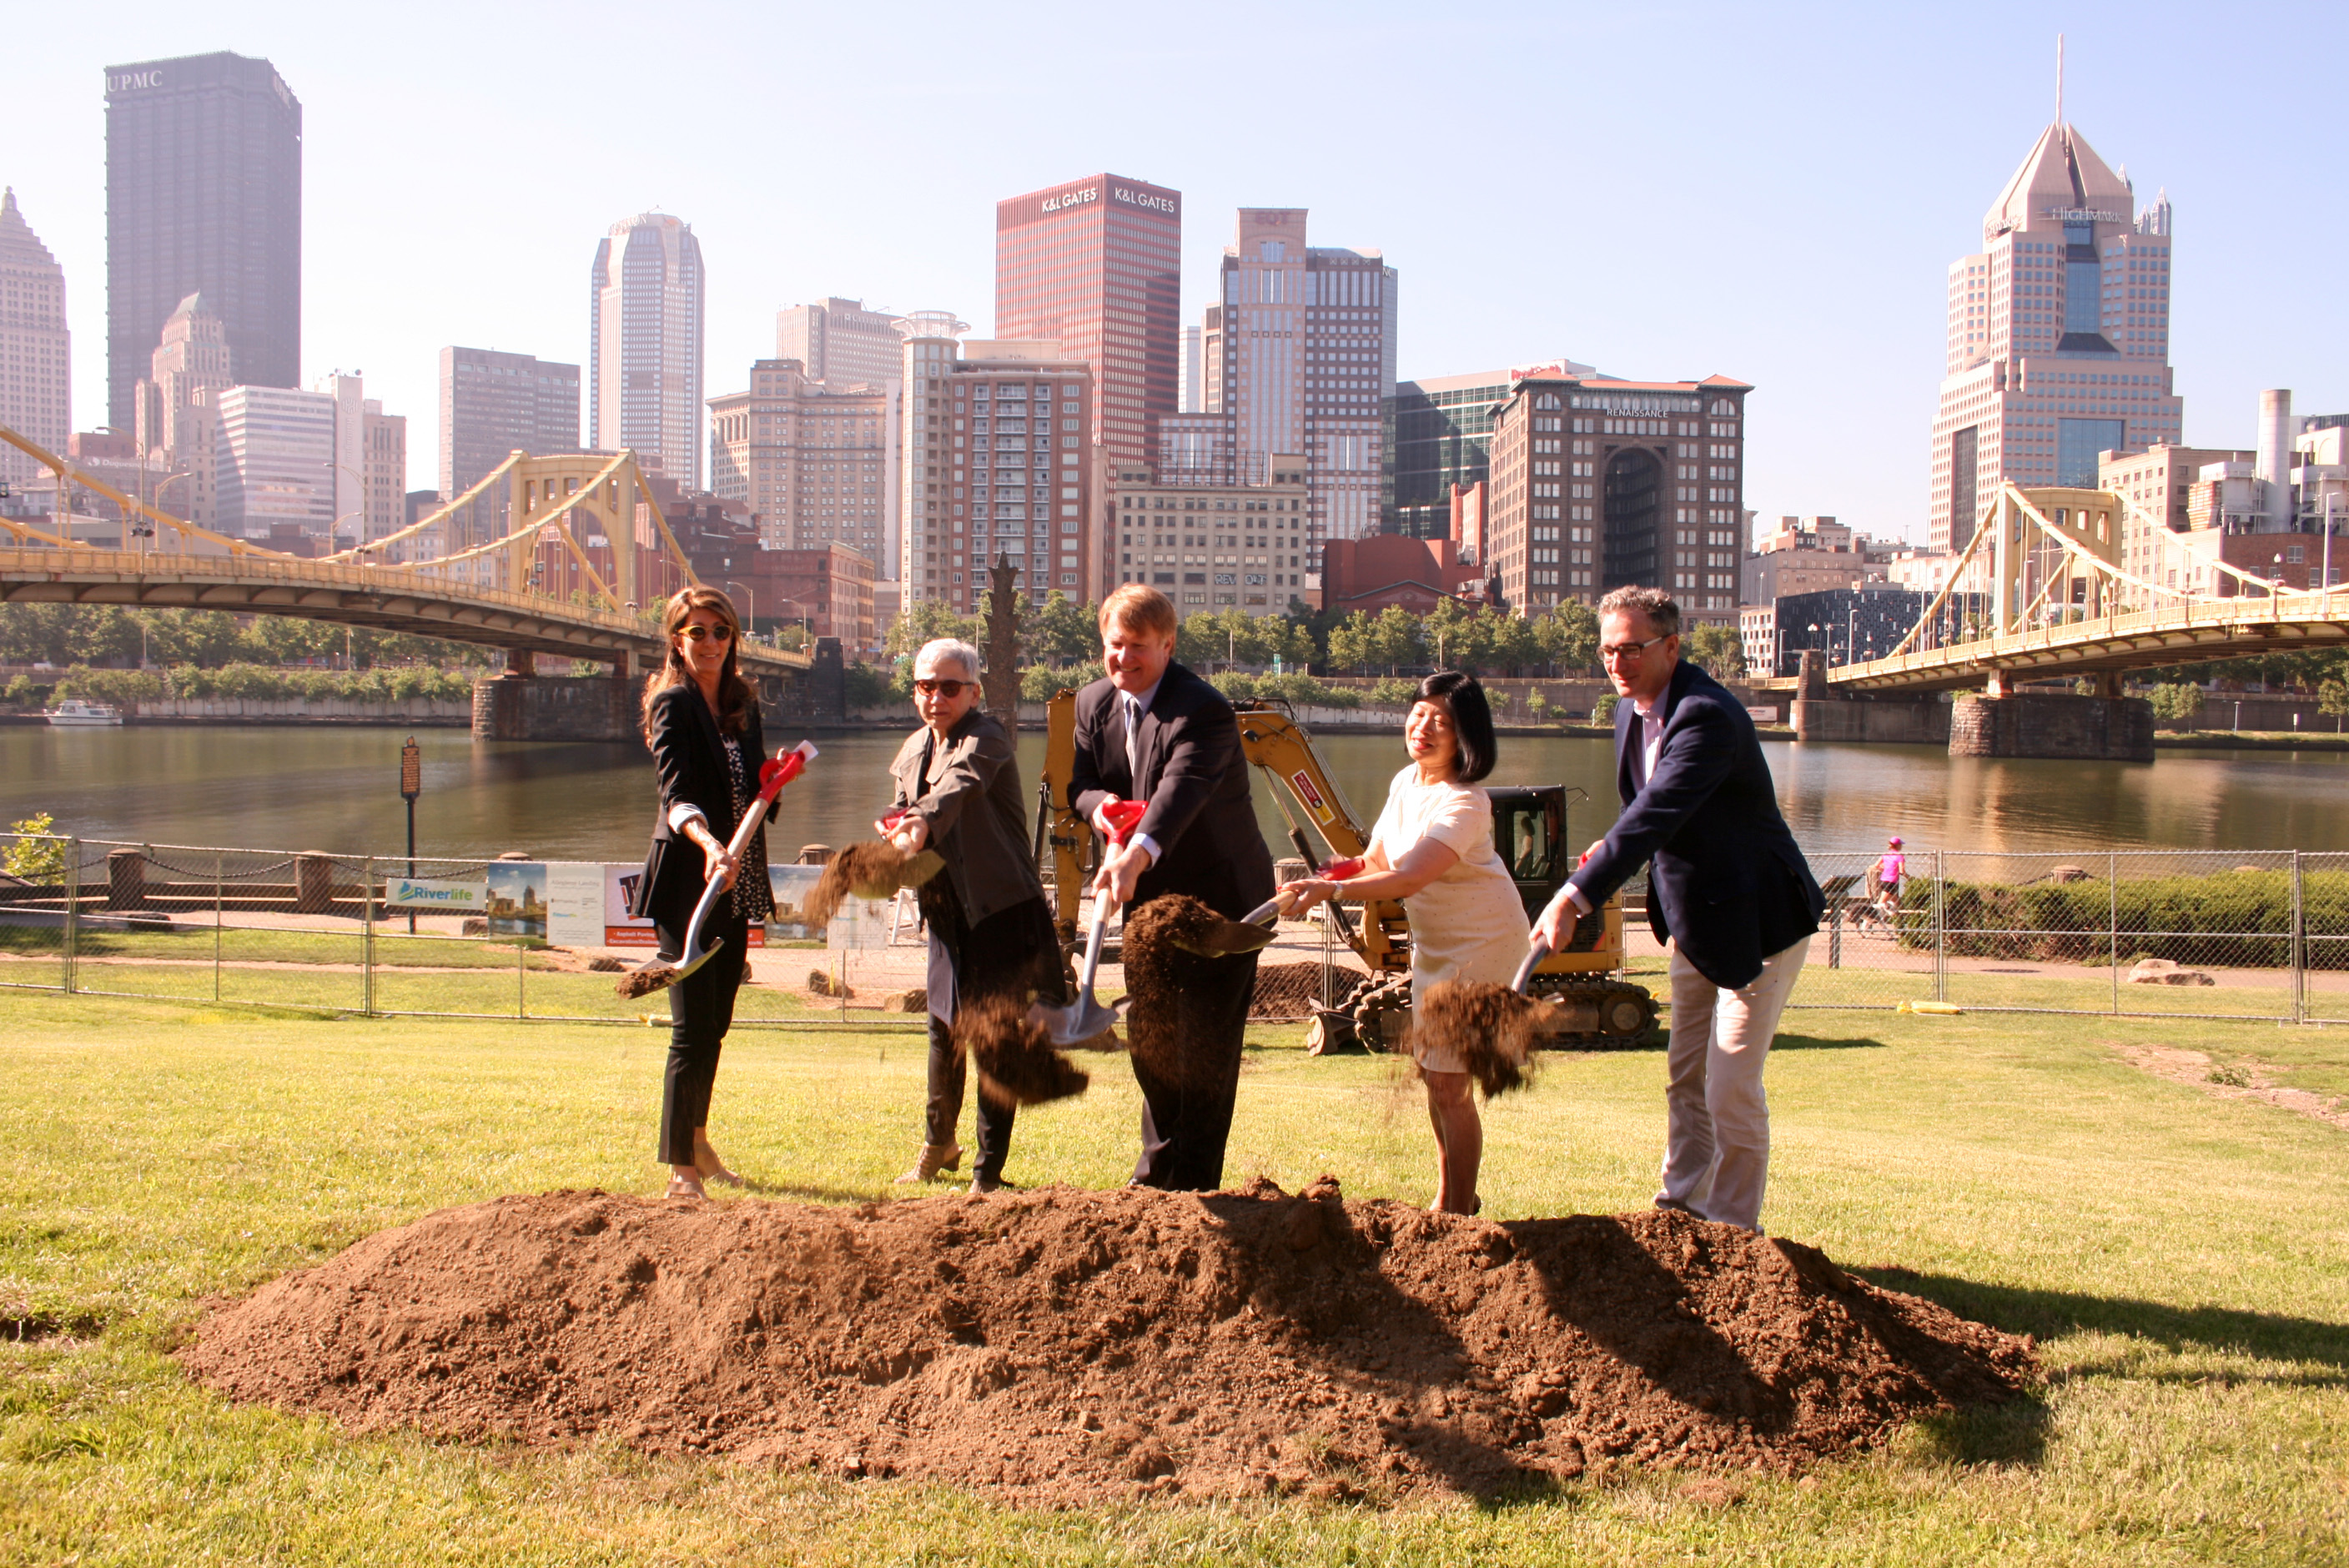 Officials break ground on Allegheny Landing with the city skyline behind them.